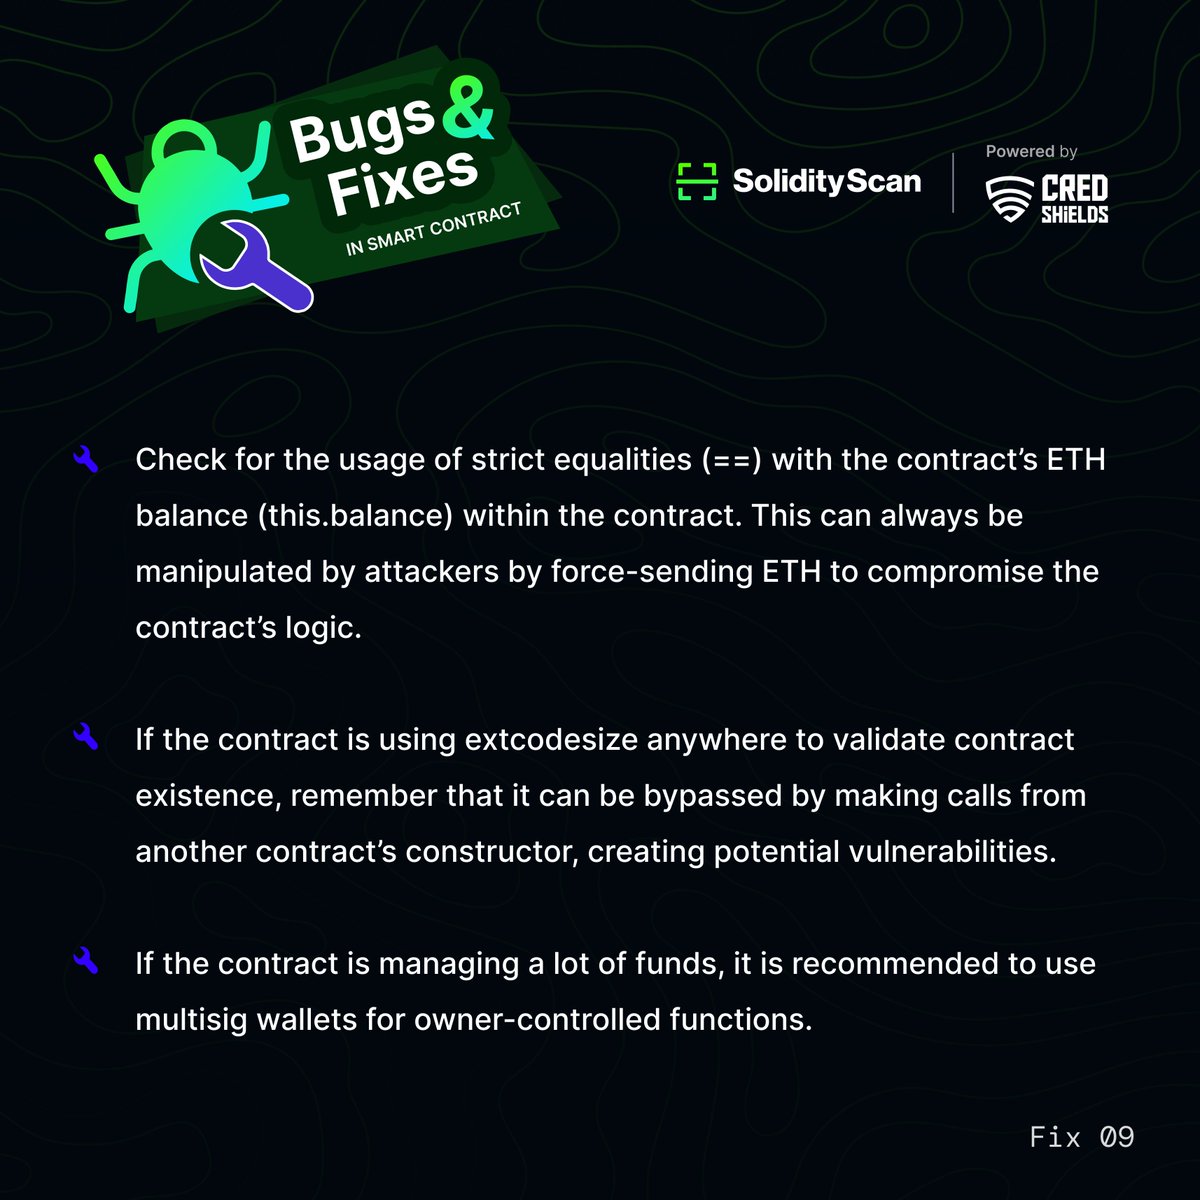 Say goodbye to bugs! Tune in for practical fixes and expert advice to keep your code bug-free. Let's code with confidence! #BugHunt #CyberSecurity #Web3